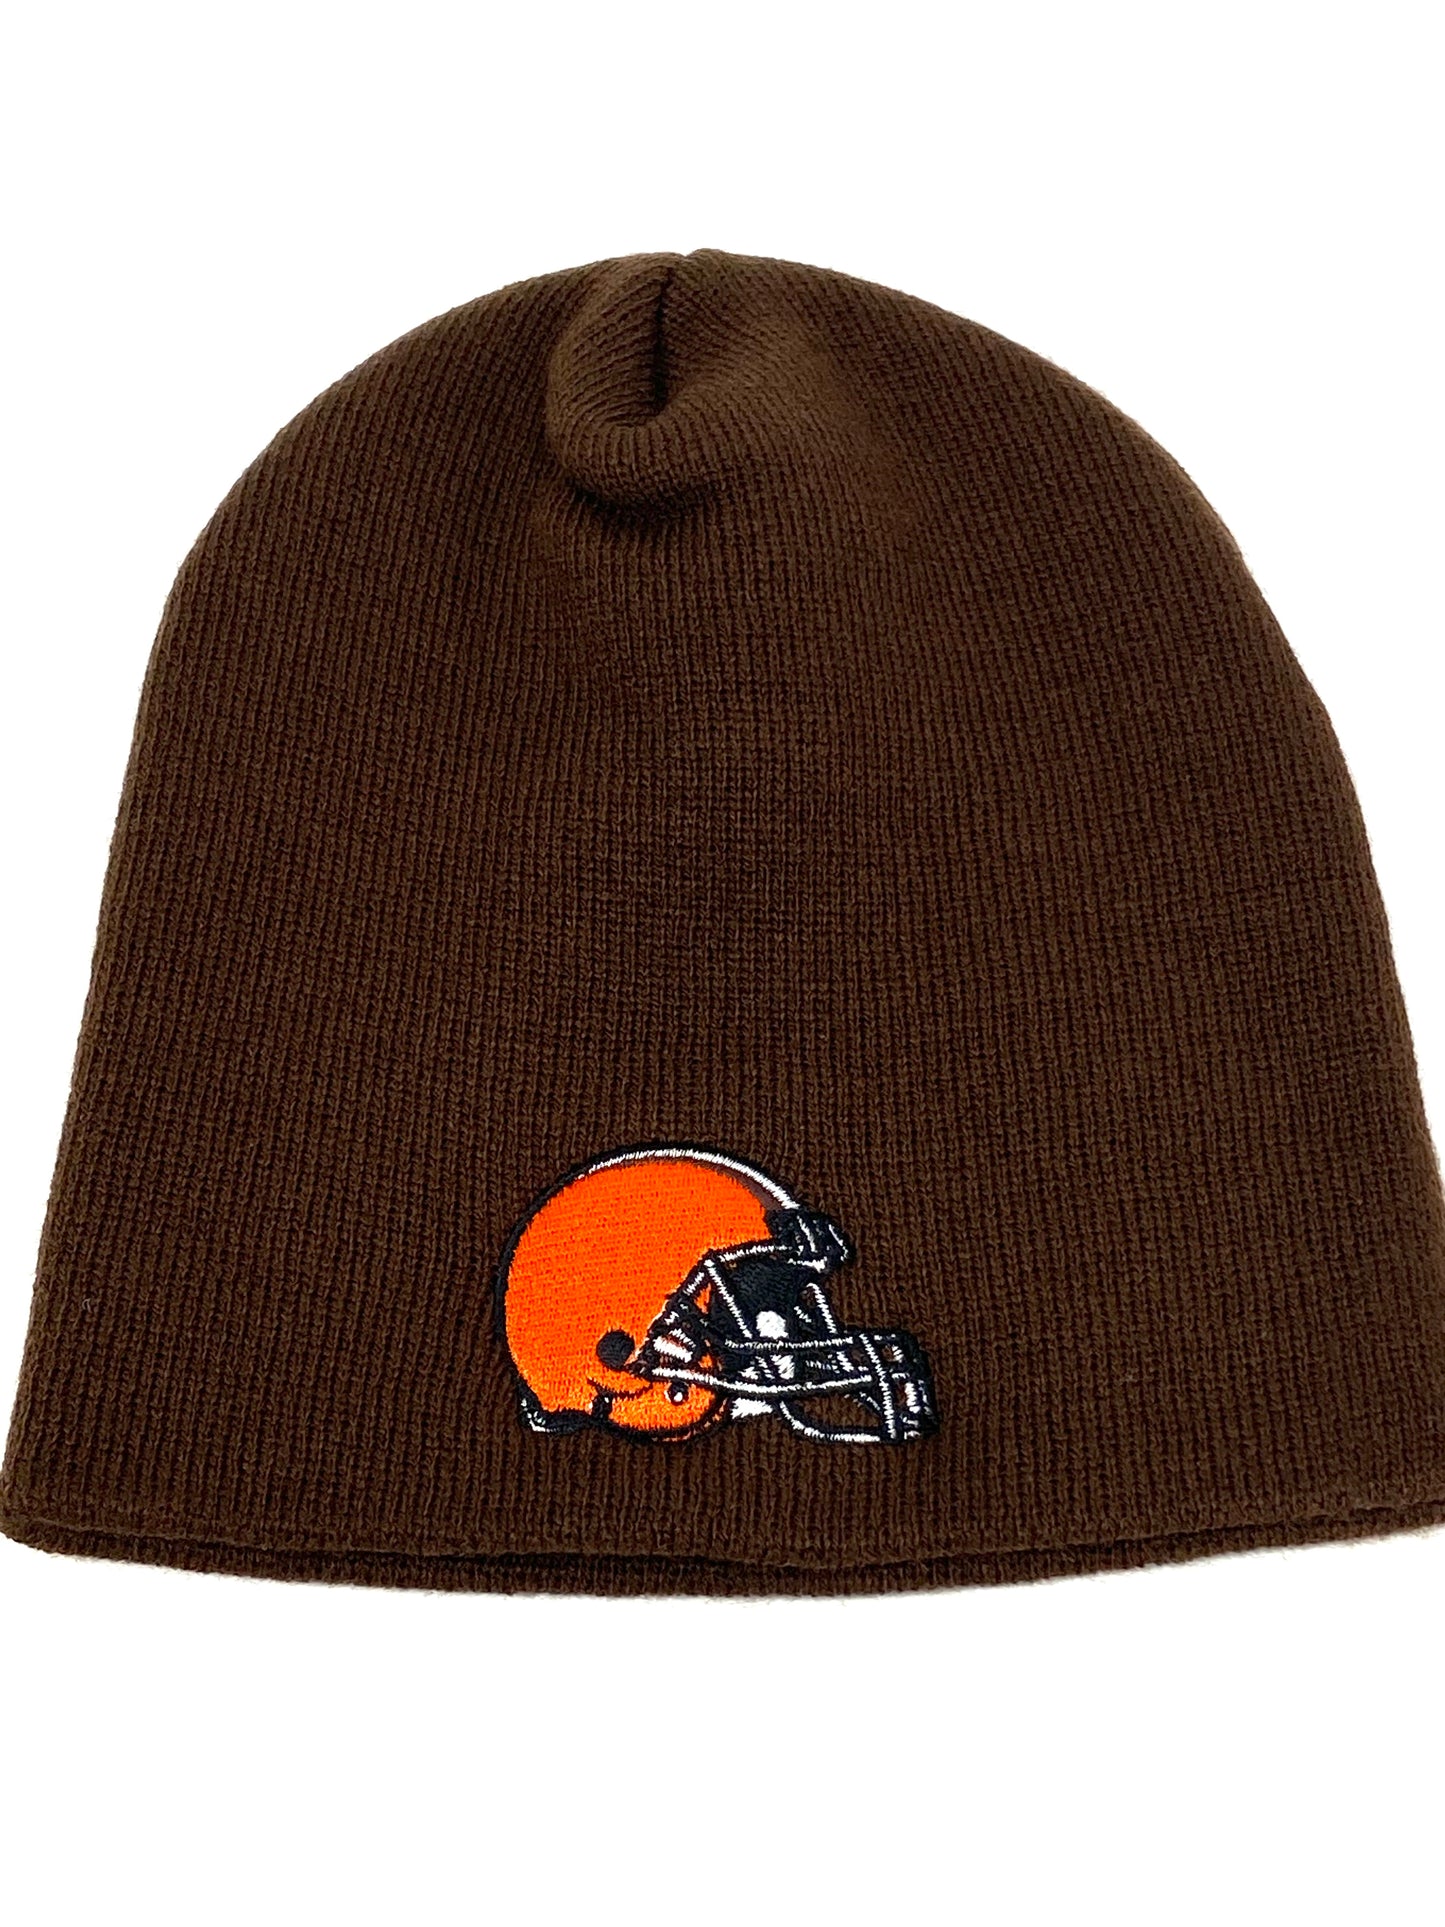 Cleveland Browns Vintage NFL Brown Logo Cuffless Beanie By Yupoong